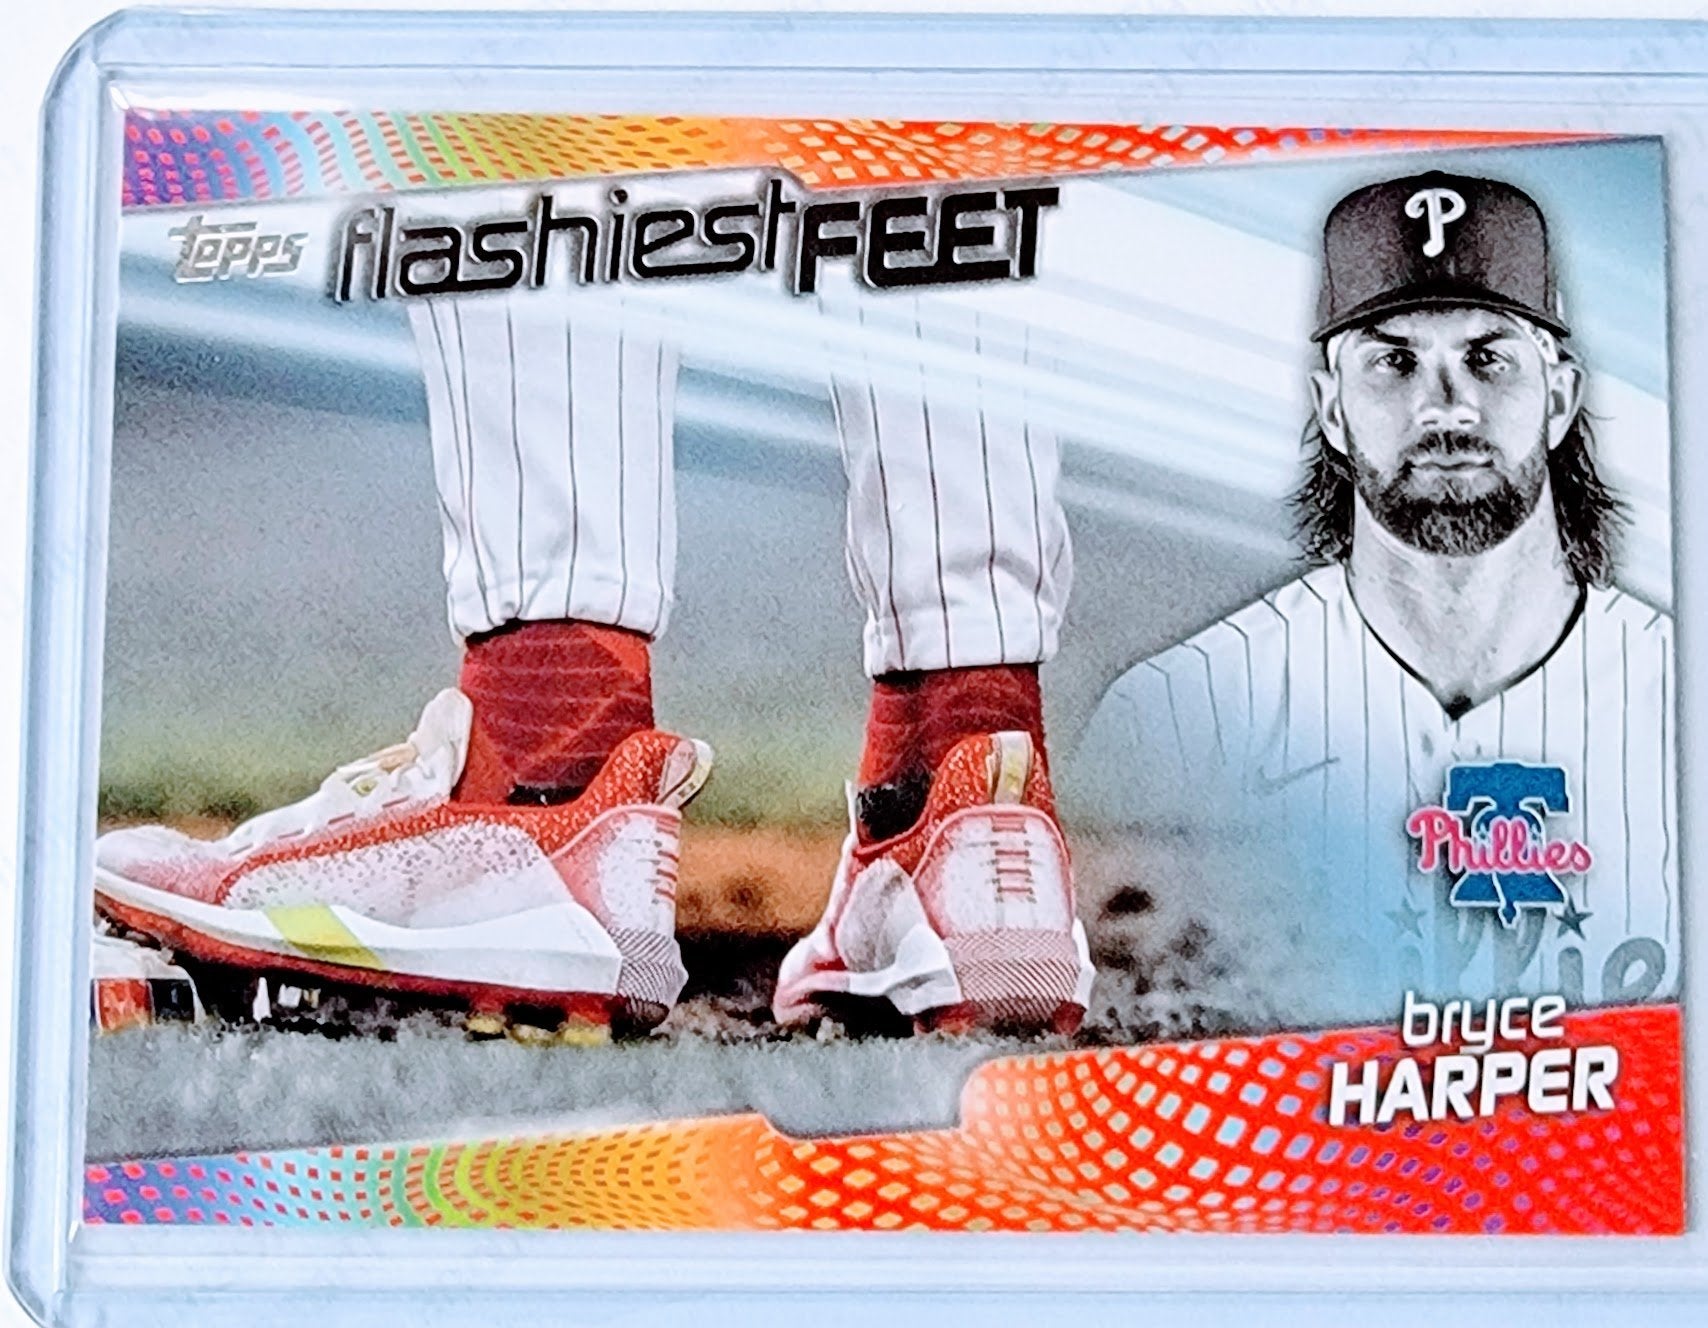 2022 Topps Bryce Harper Flashiest Feet Baseball Trading Card GRB1 simple Xclusive Collectibles   